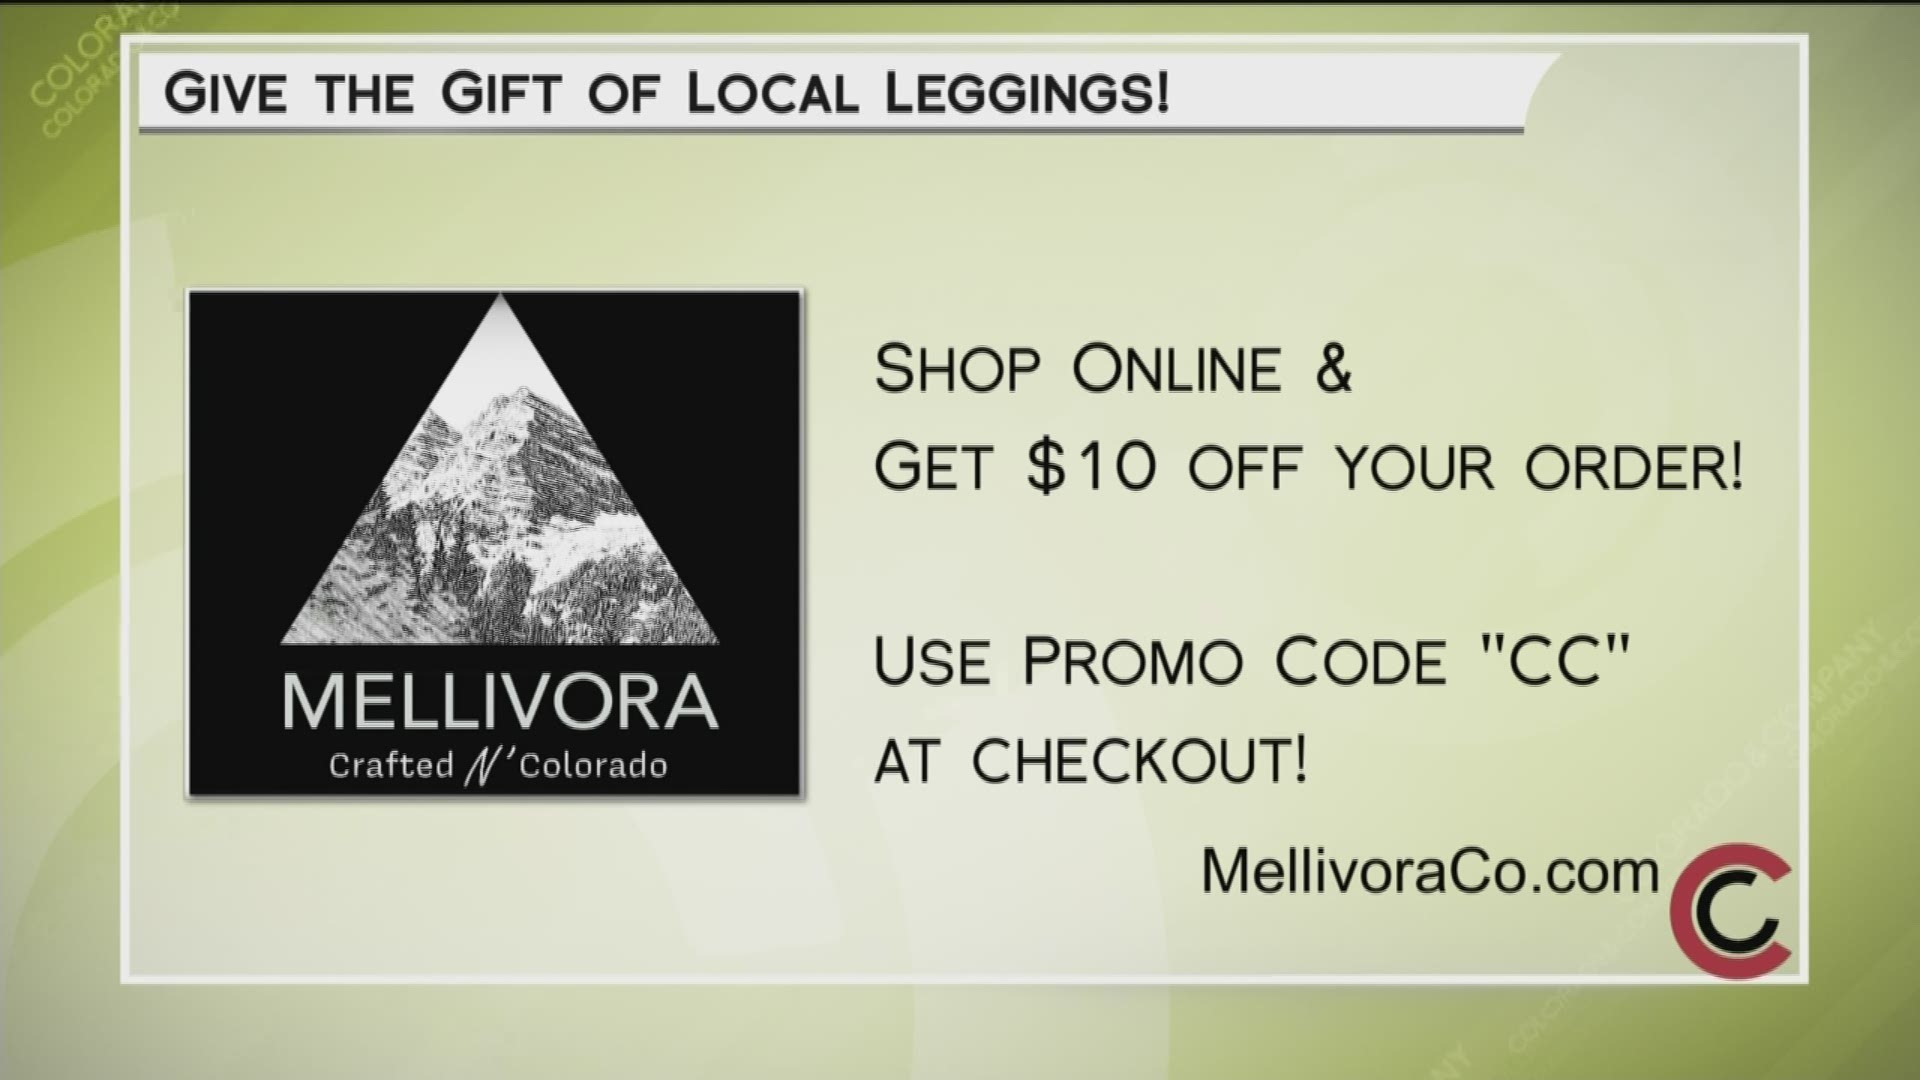 Get some Mellivora Leggings for that special someone on your Christmas list this season. Shop today for $10 off at MellivoraCO.com—use code CC at checkout.